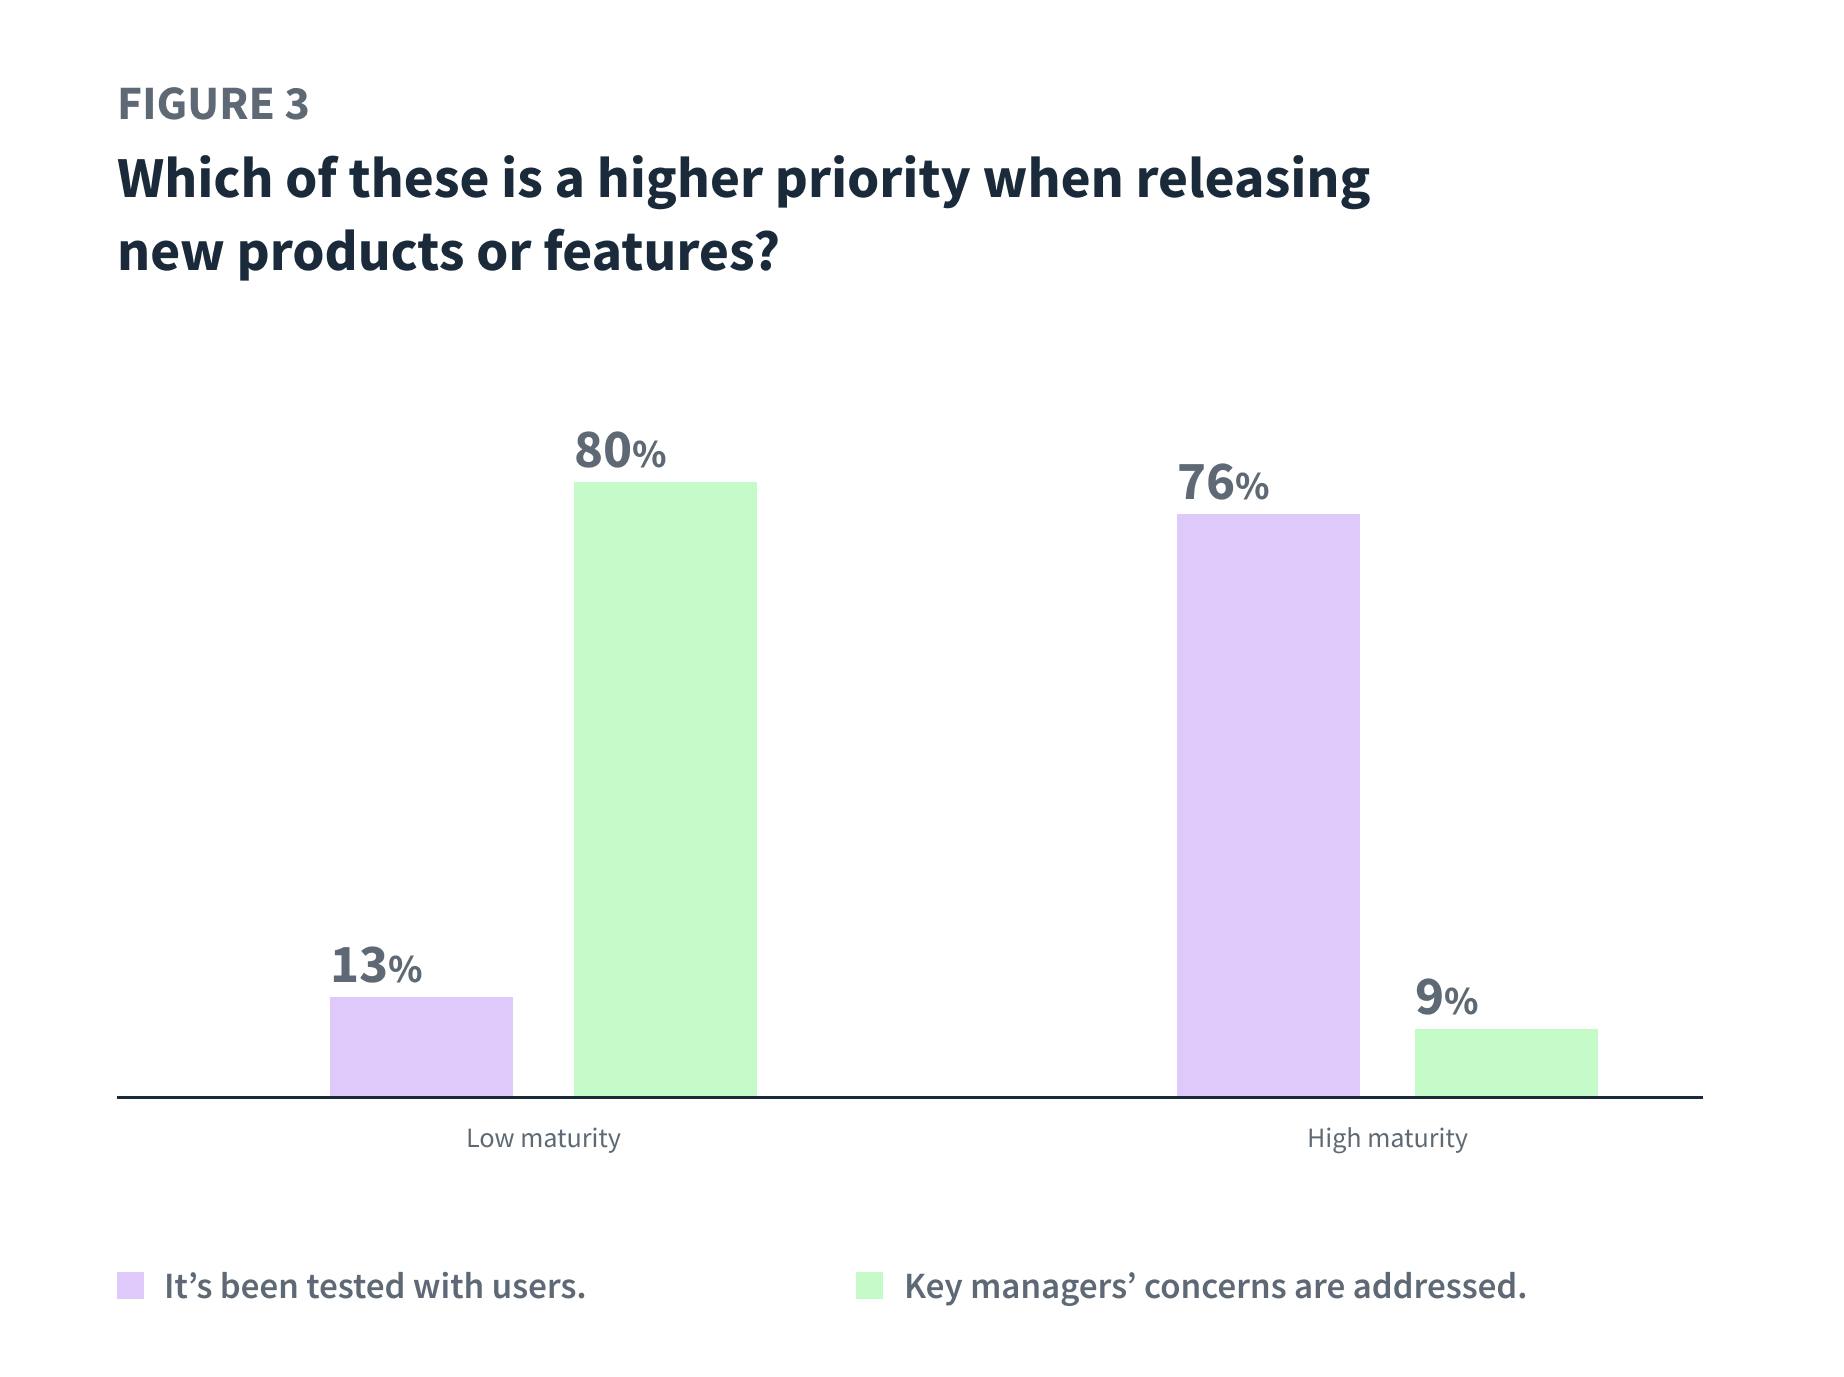 Figure 3: Which of these is top priority when releasing new products or features? Low maturity: 'key manager's concerns are addressed' (80%), 'it's been tested with users' (13%). High maturity: 'it's been tested with users' (76%), 'key manager's concerns are addressed' (9%)